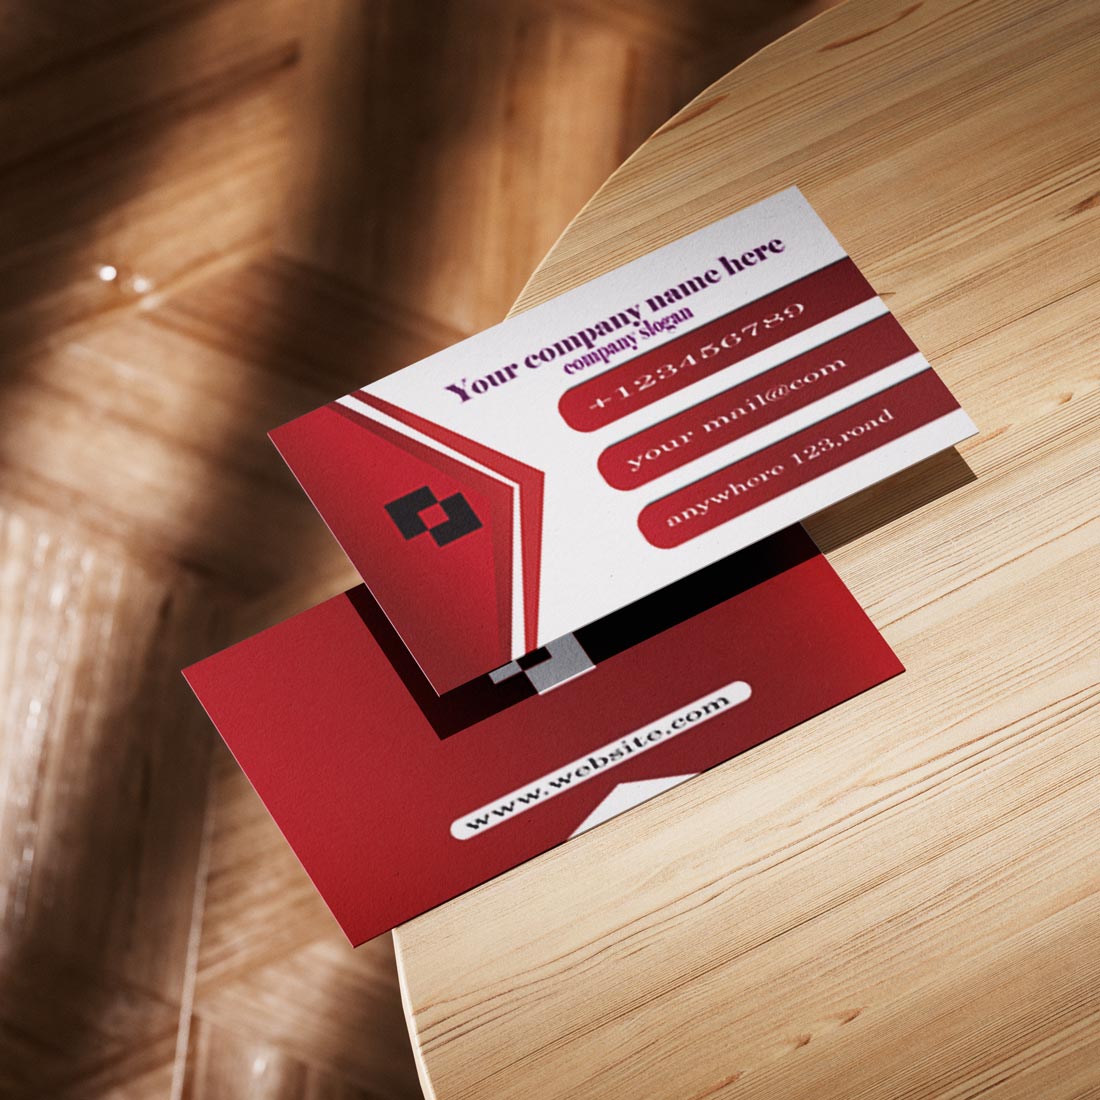 Premium quality business card (editable) cover image.